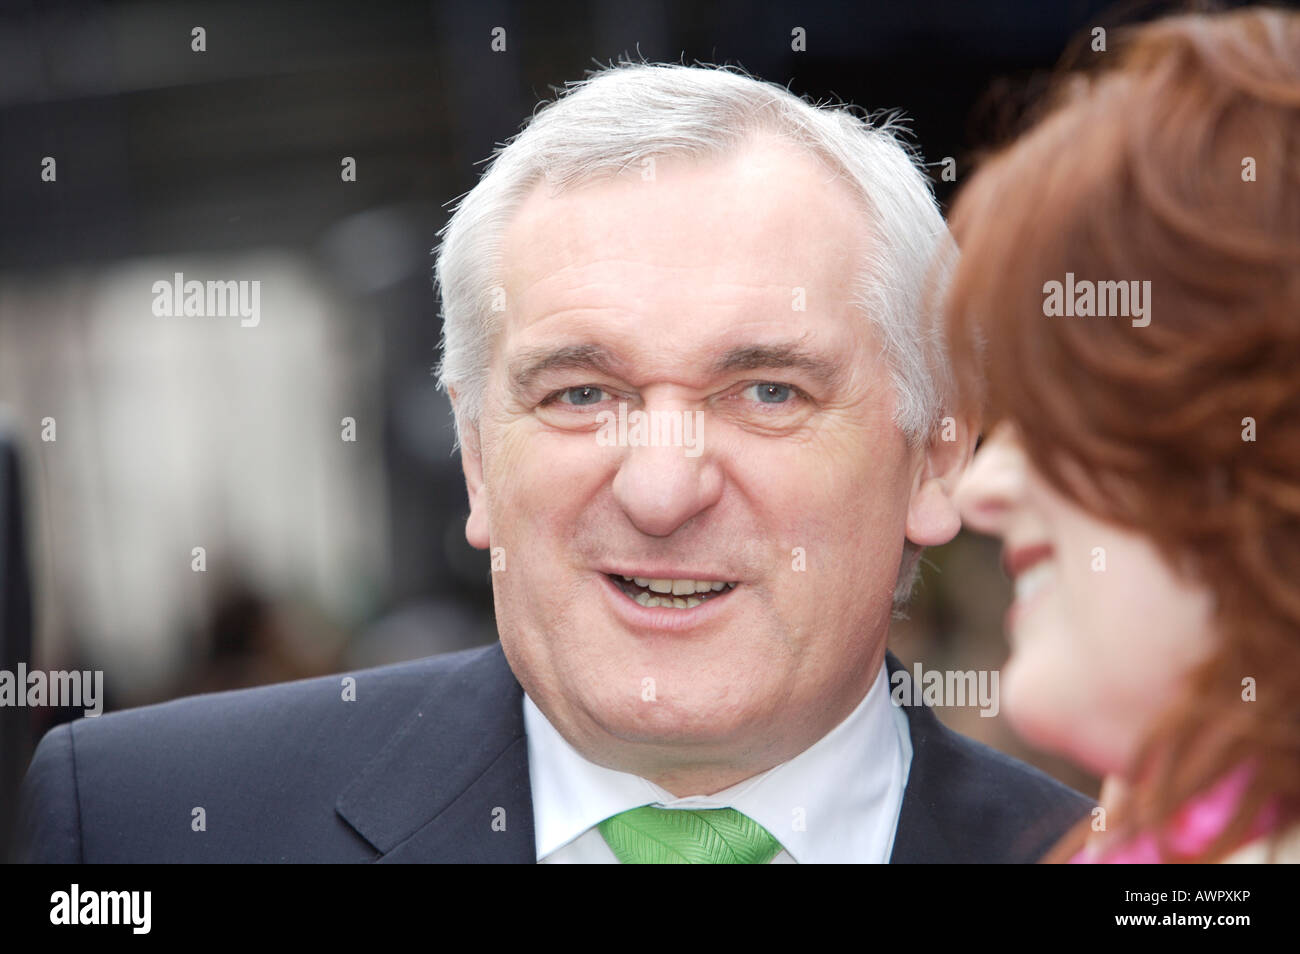 The Former Taoiseach Of Ireland Bertie Ahern Smiling At The Camera